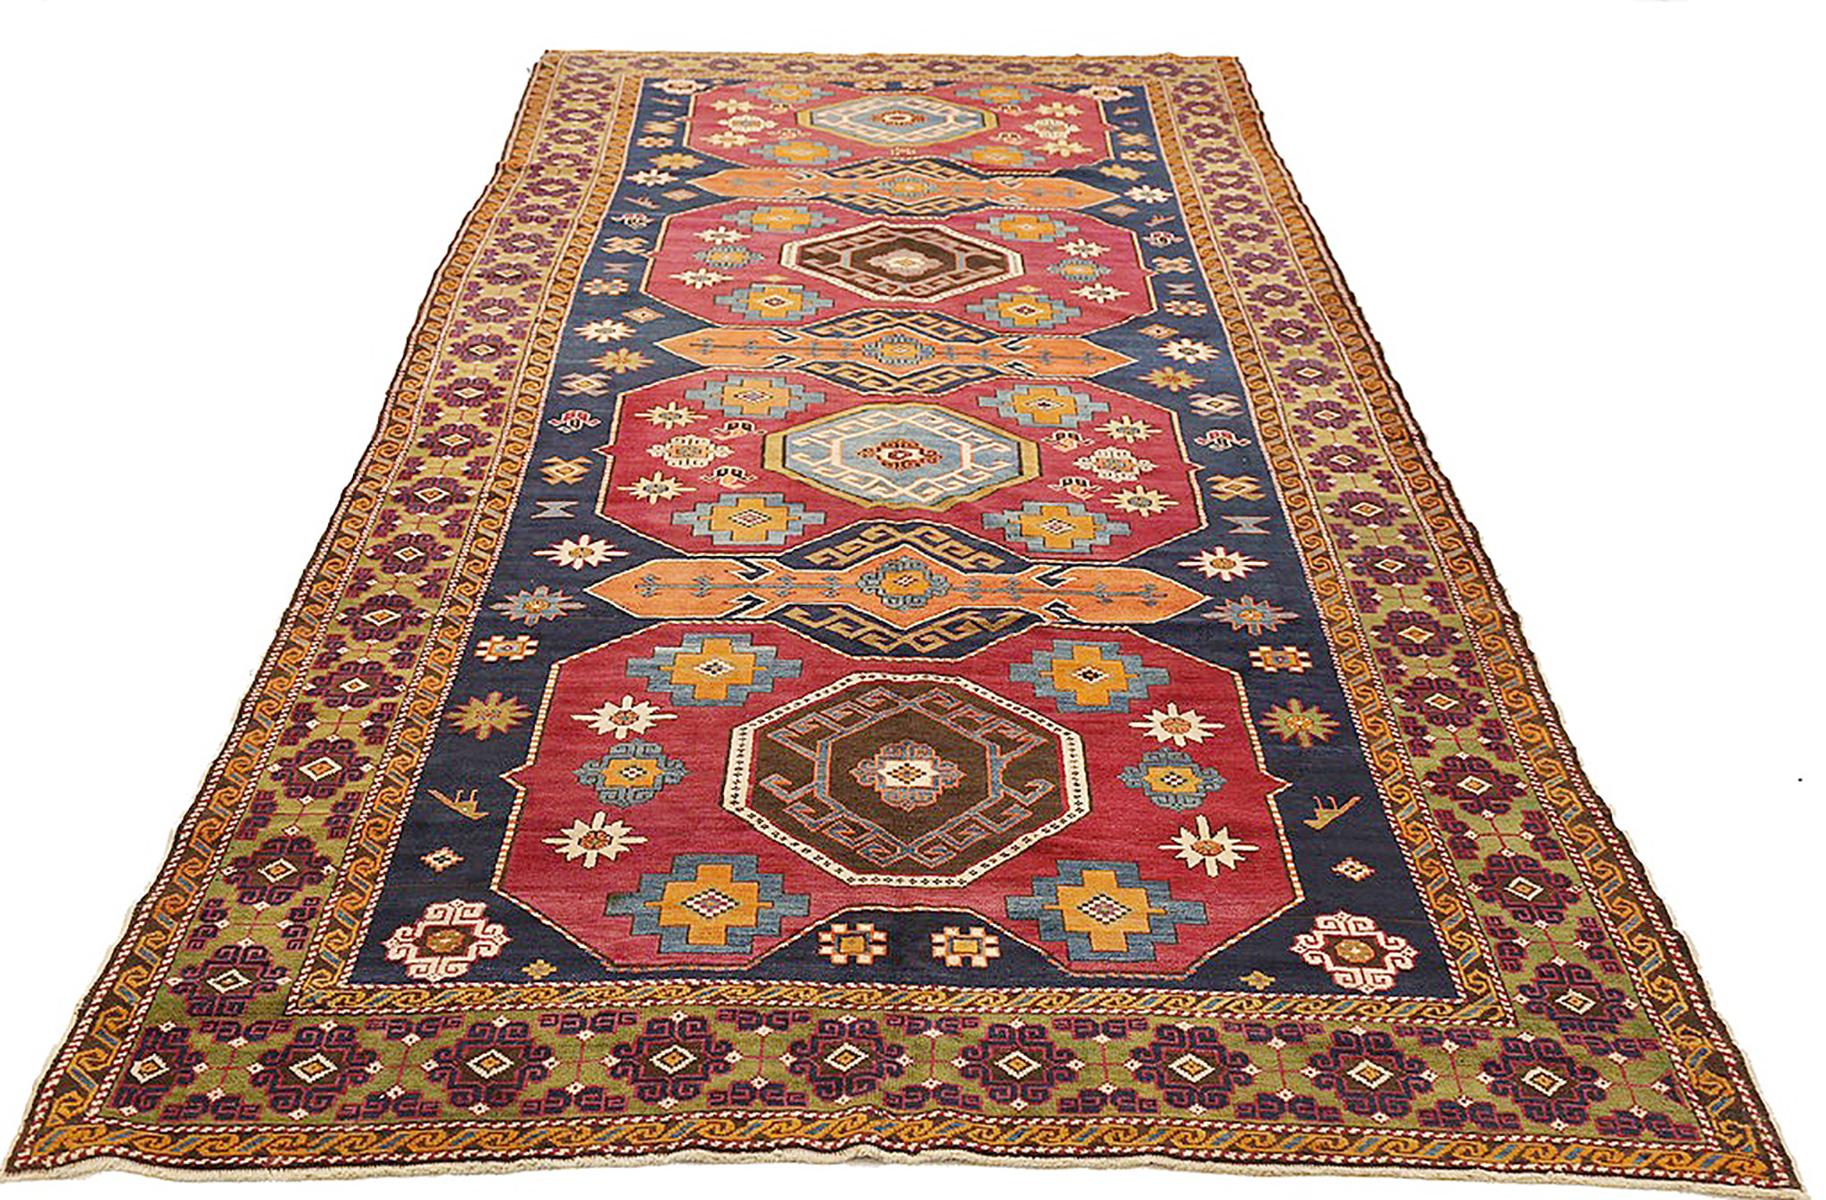 Antique Russian Shirvan rug handwoven from the finest sheep’s wool and colored with all-natural vegetable dyes that are safe for humans and pets. It’s a traditional Shirvan design featuring a mix of geometric and floral medallions in orange, red,